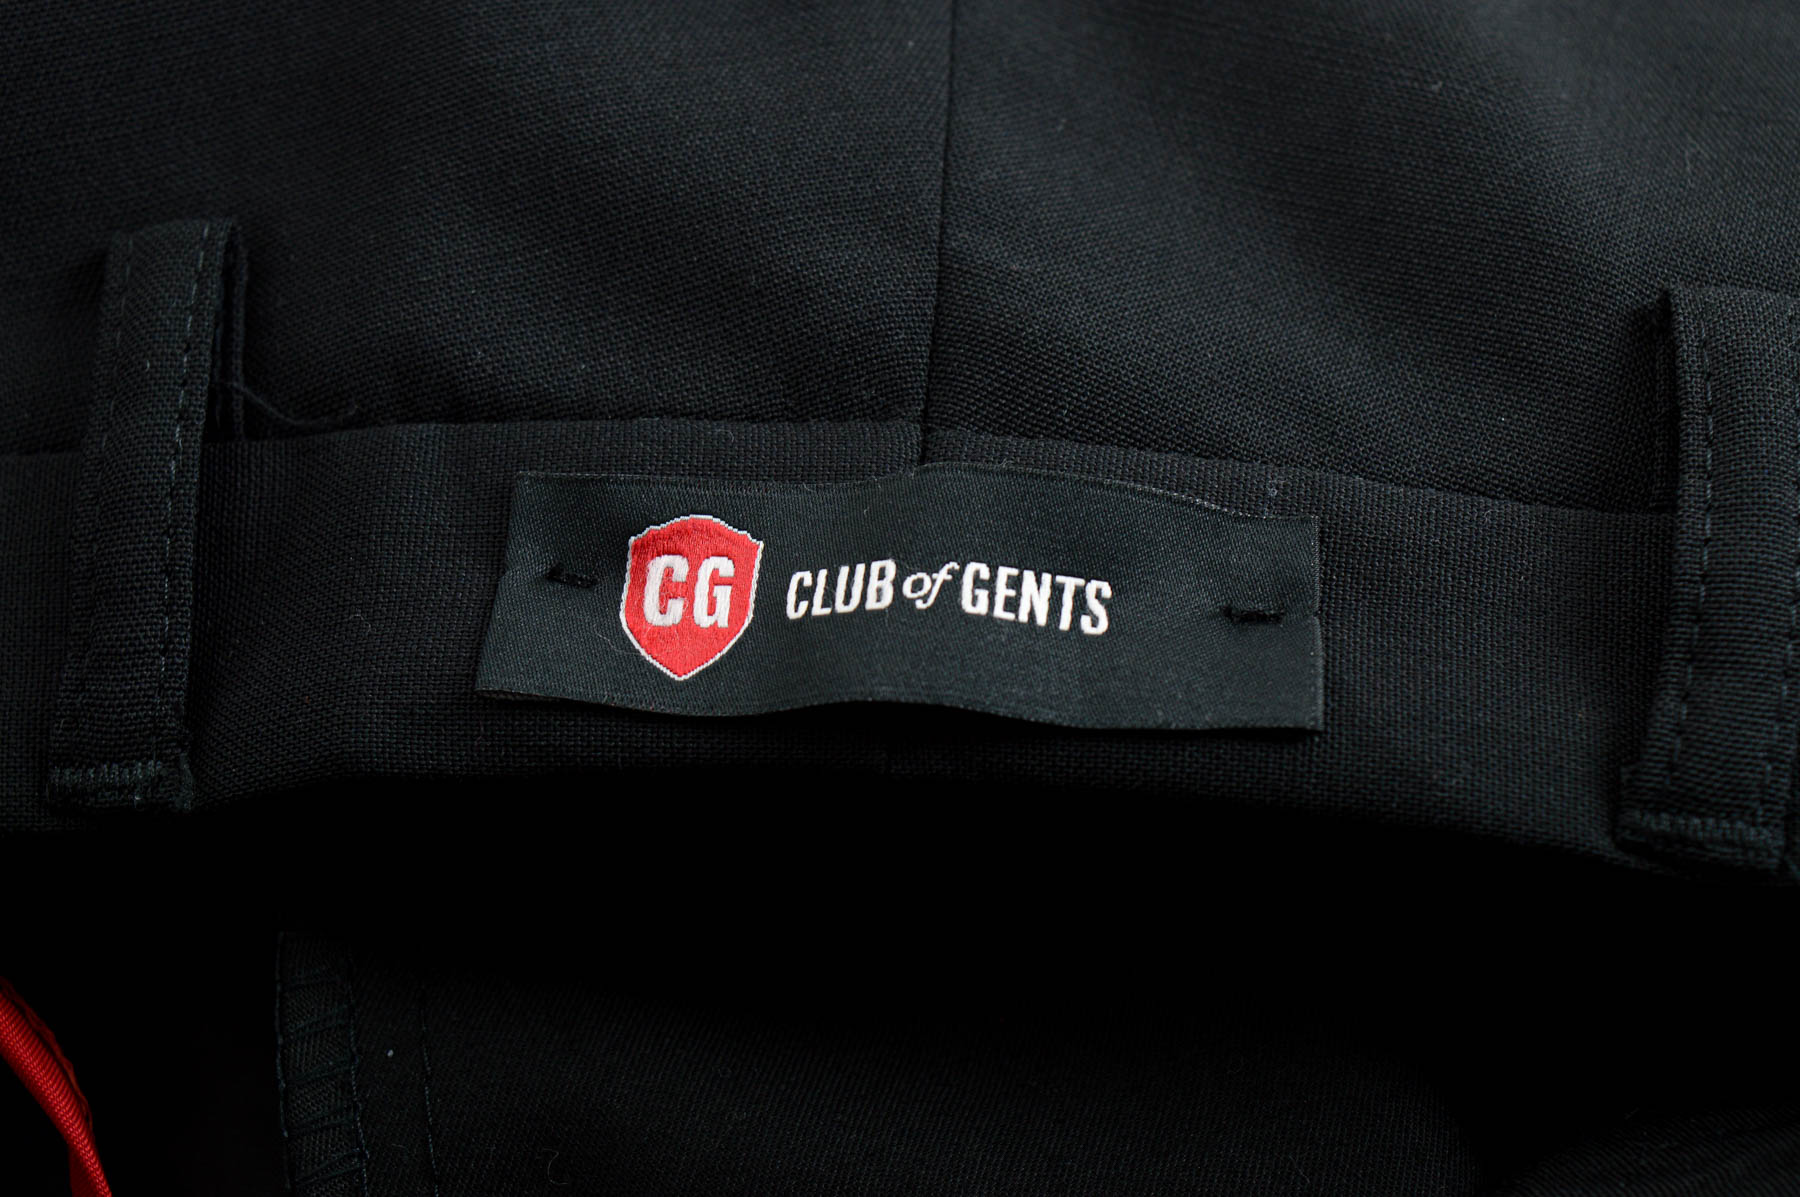 Men's trousers - Club of Gents - 2